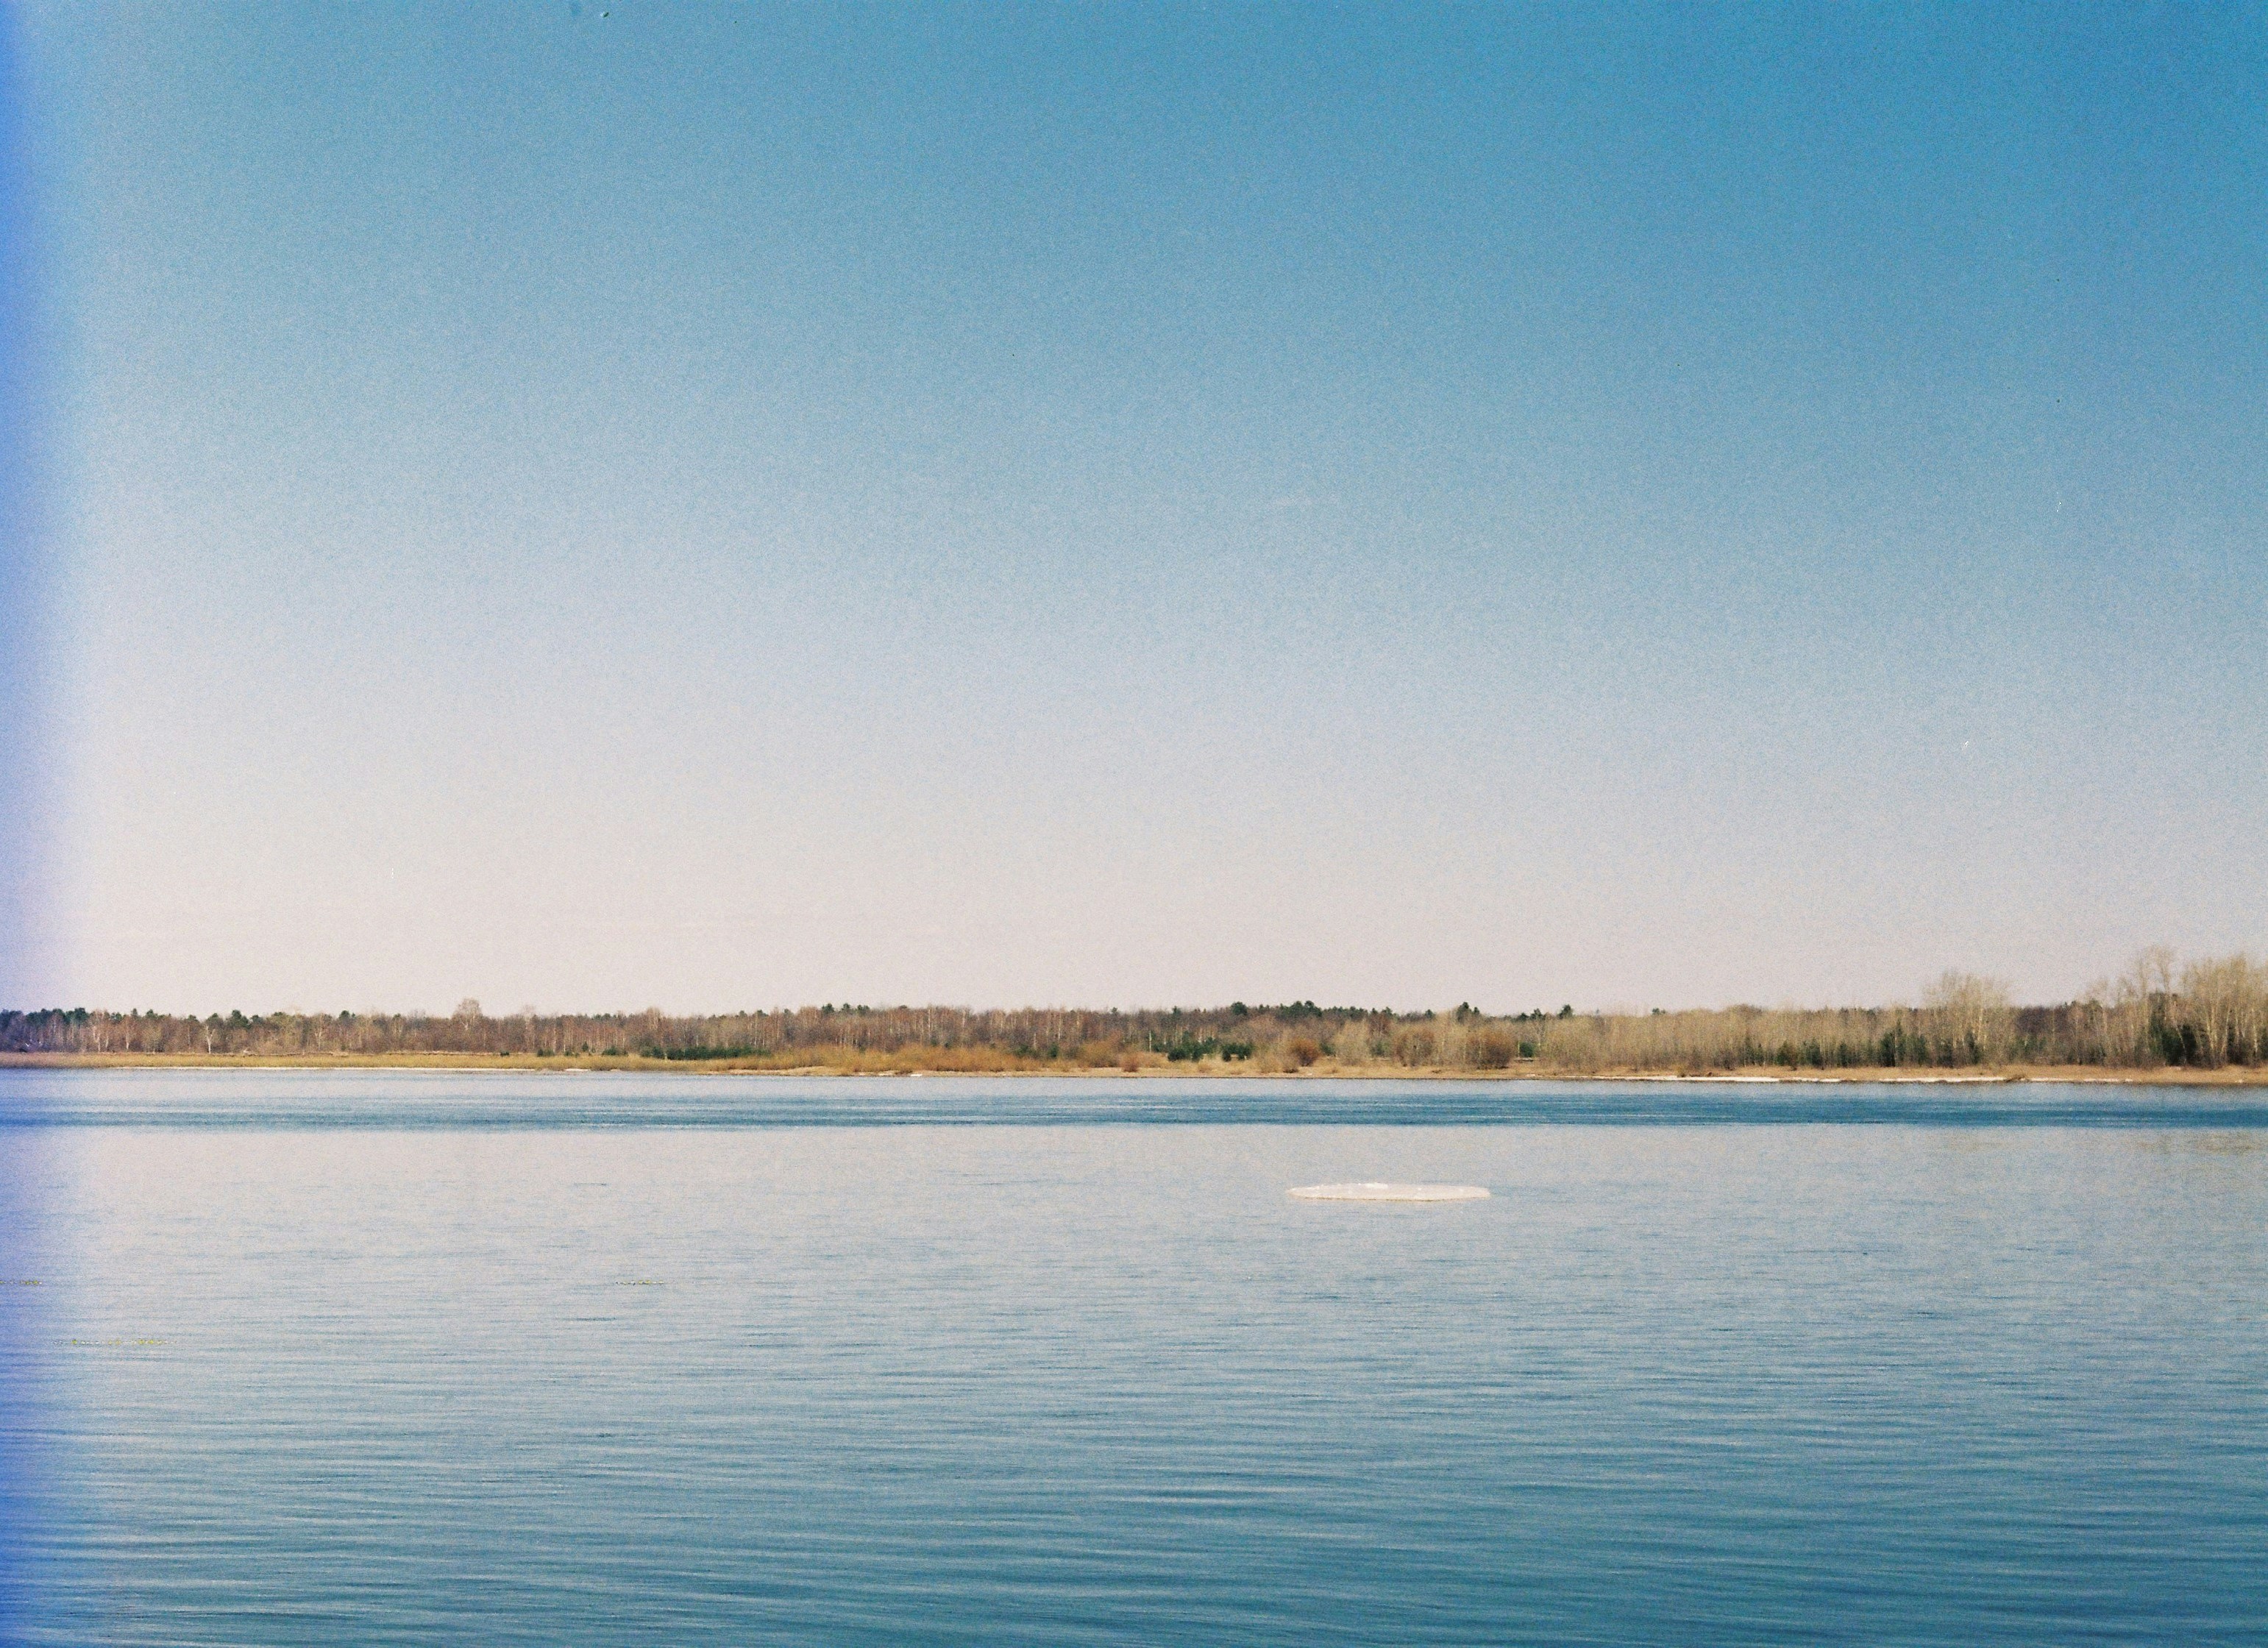 A wide river with an island in the middle, blue sky, blue water. Early spring, sunny day. Minimalism, Perfectionist Paradise. @art.ilya - Сamera roll Kodak.